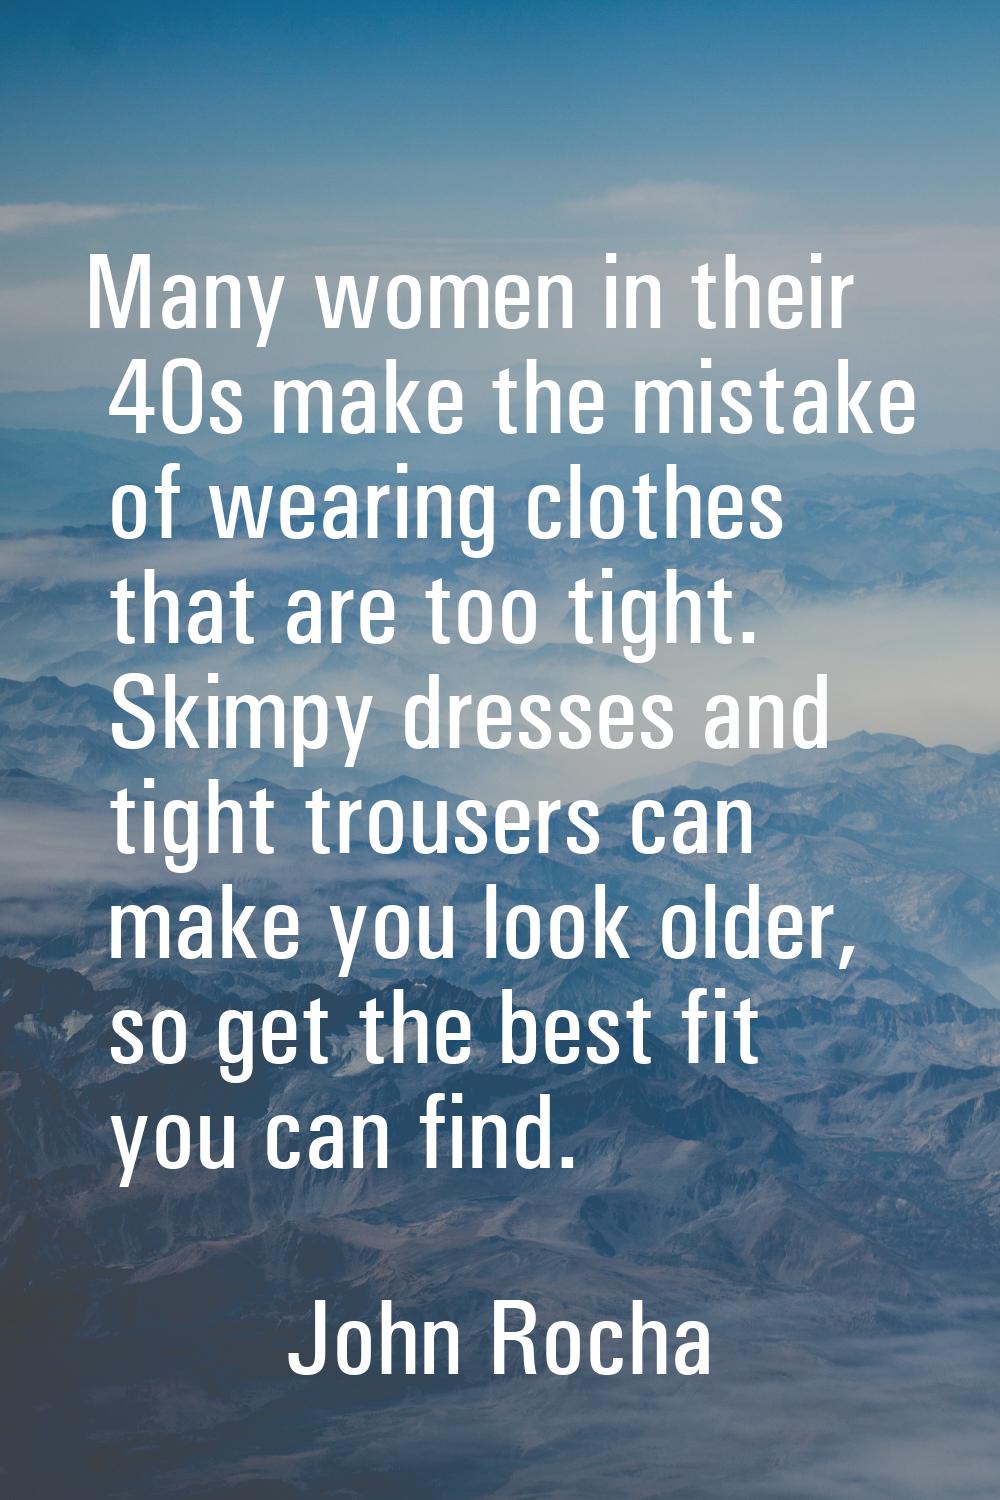 Many women in their 40s make the mistake of wearing clothes that are too tight. Skimpy dresses and 